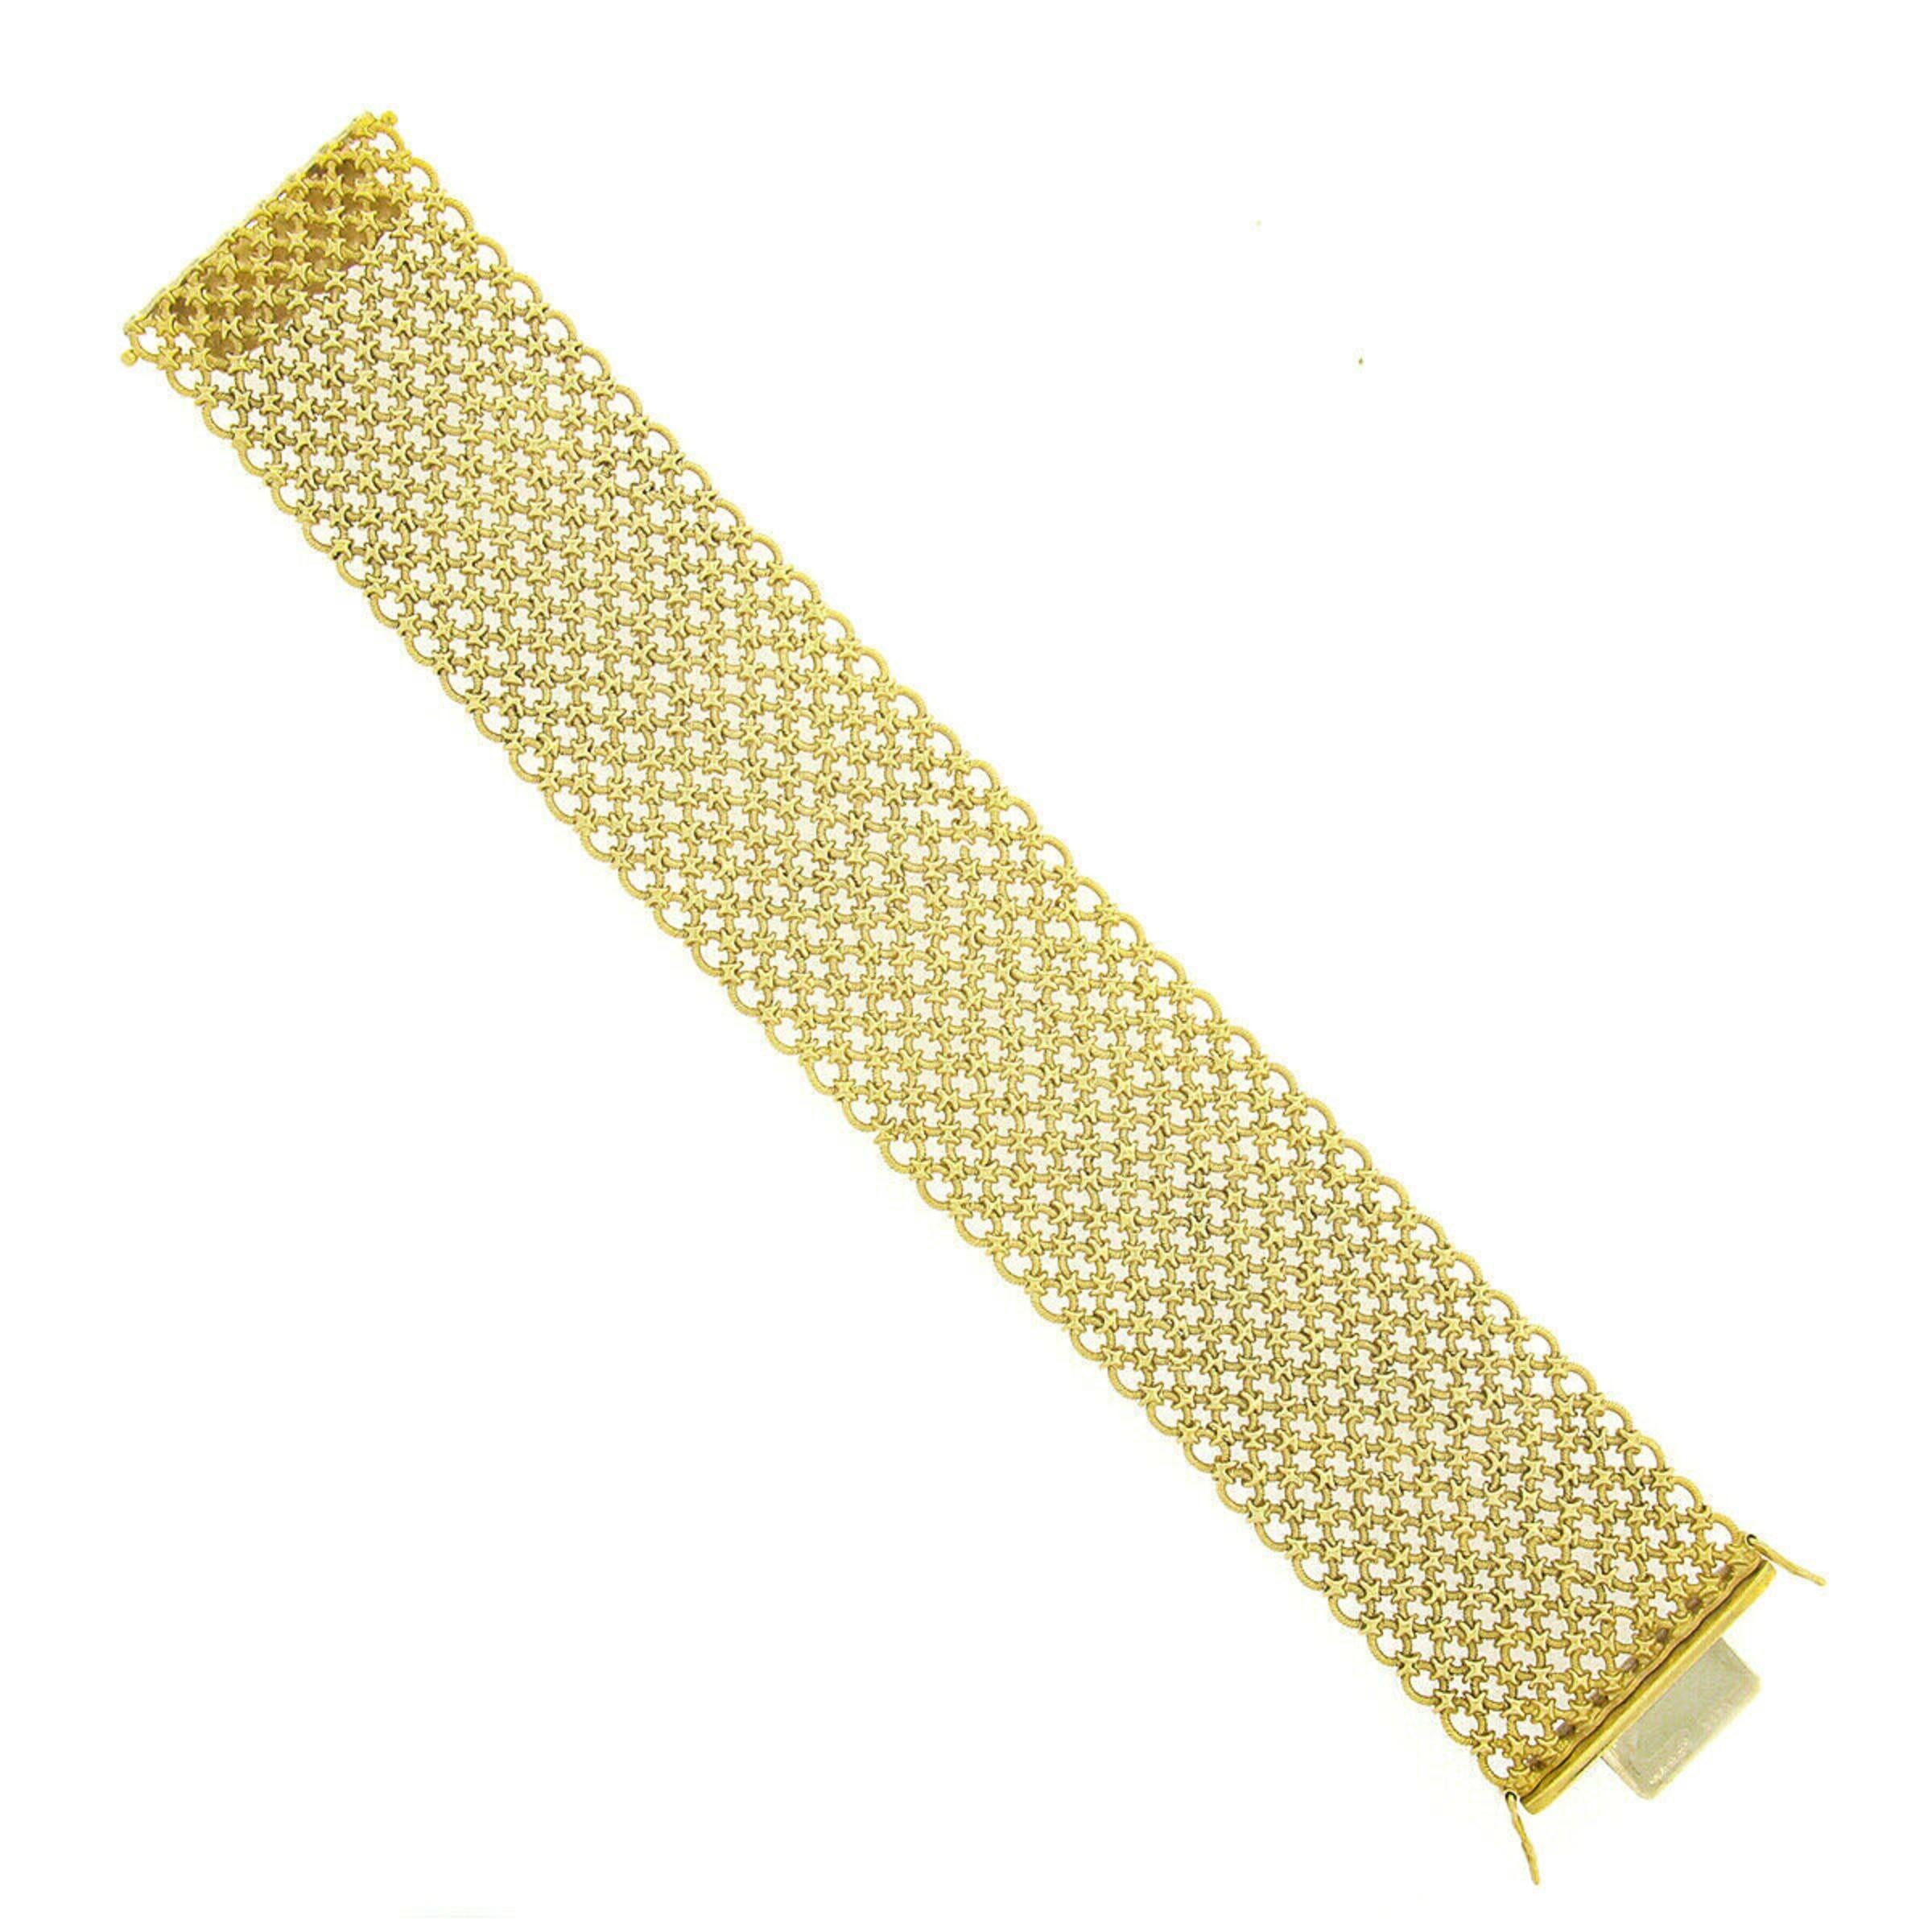 You're looking at a master piece by the Italian luxury brand Bvlgari. This incredibly well made vintage bracelet is crafted in solid 18k yellow gold and features a wide design constructed from textured circular links that are connected throughout